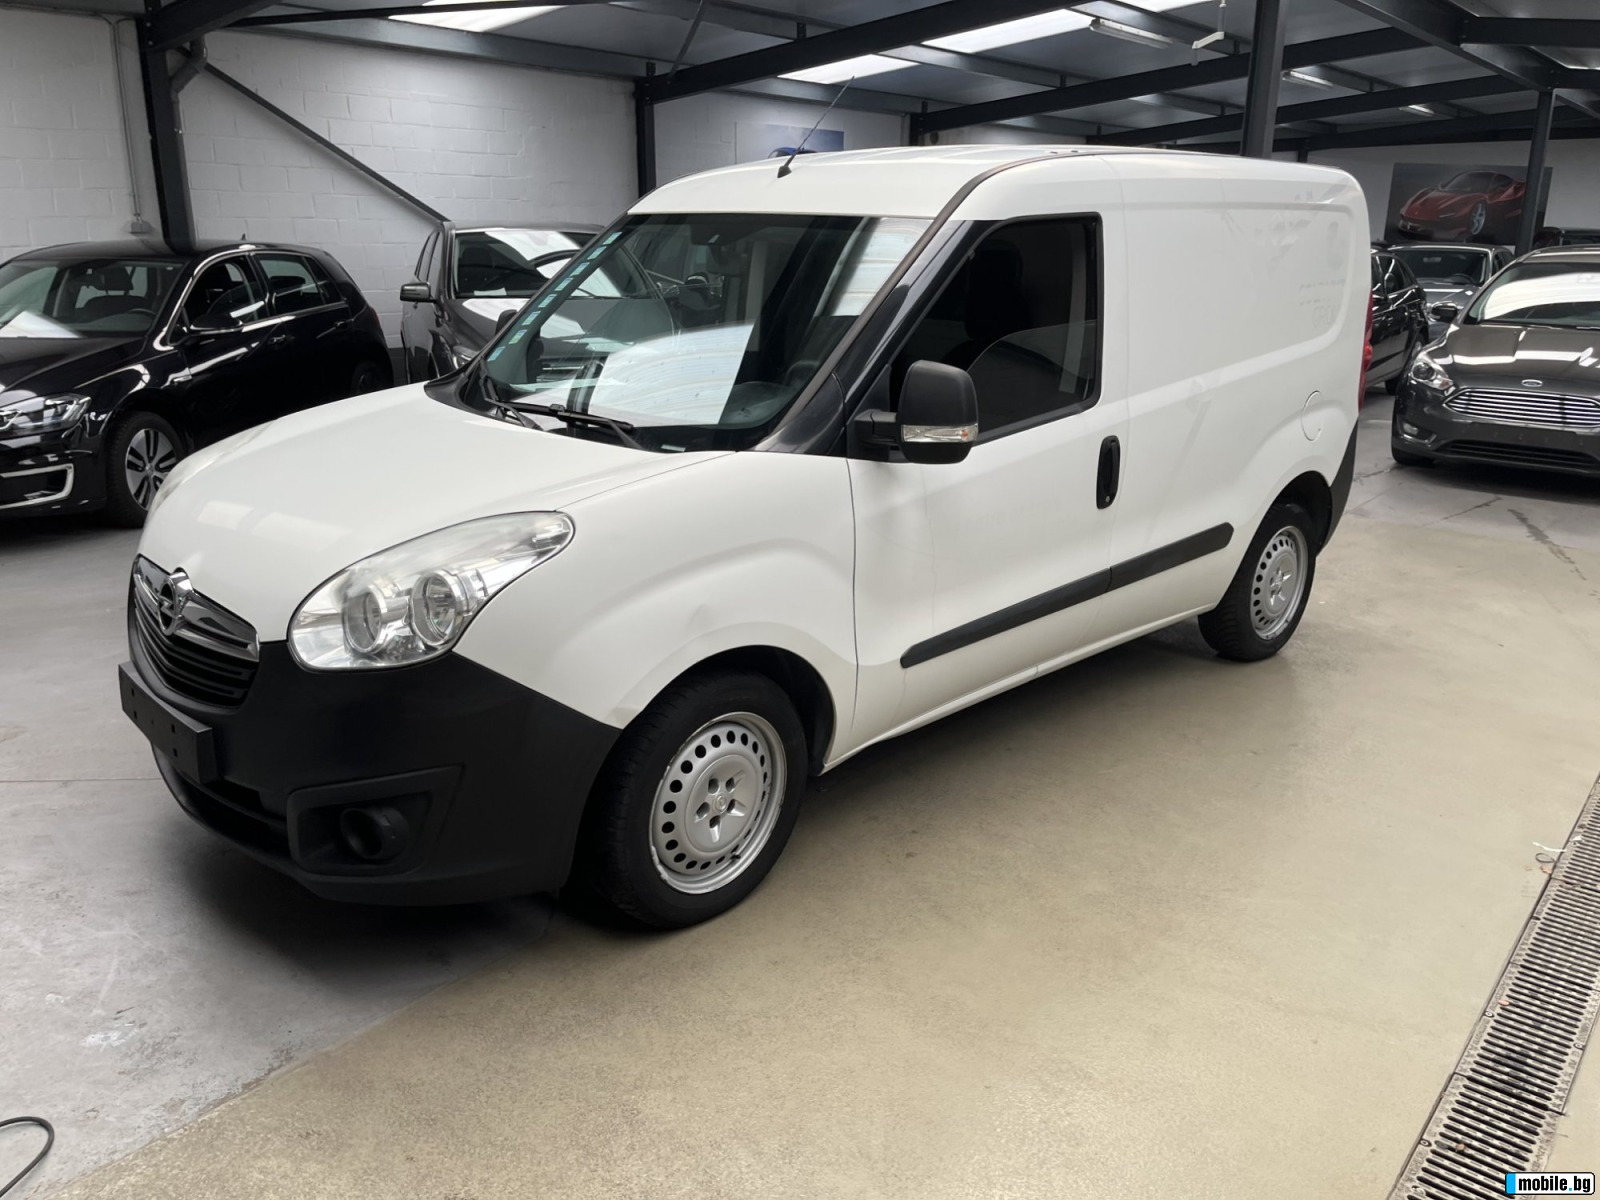 Opel Combo  CNG | Mobile.bg   2